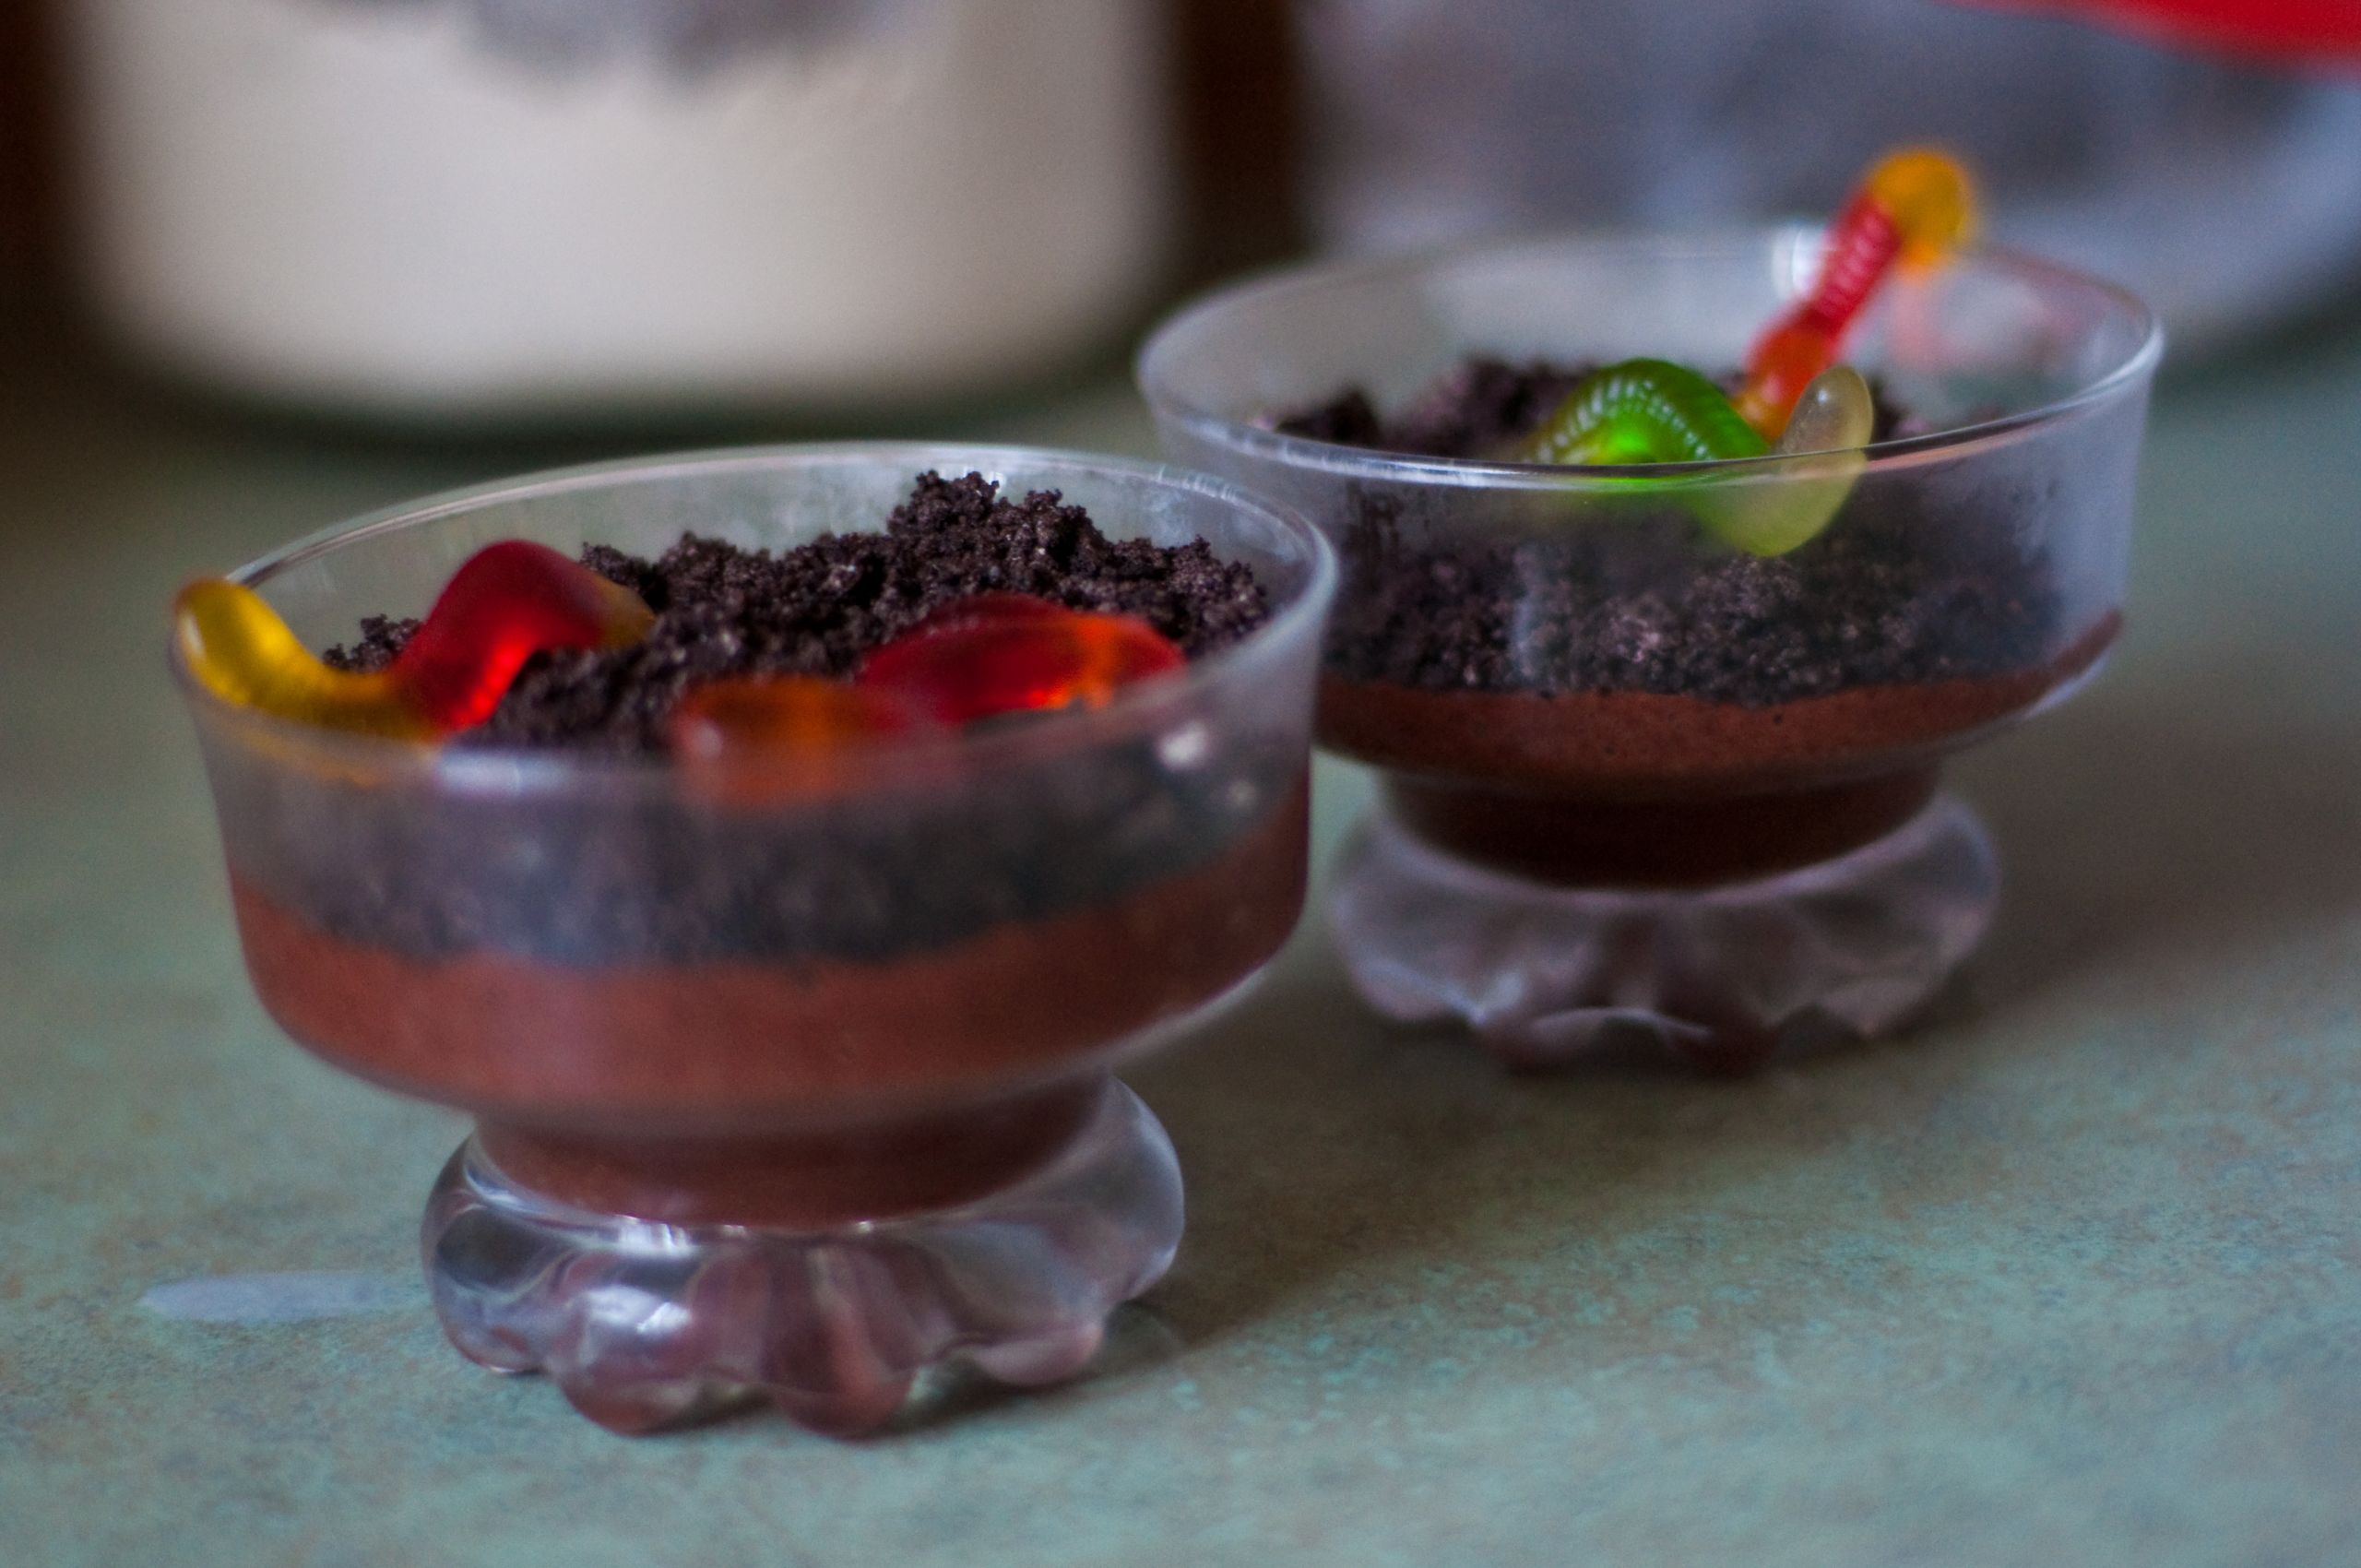 Fun Desserts To Make With Kids
 Dirt Cups and Ant Hills – Desserts for Kids